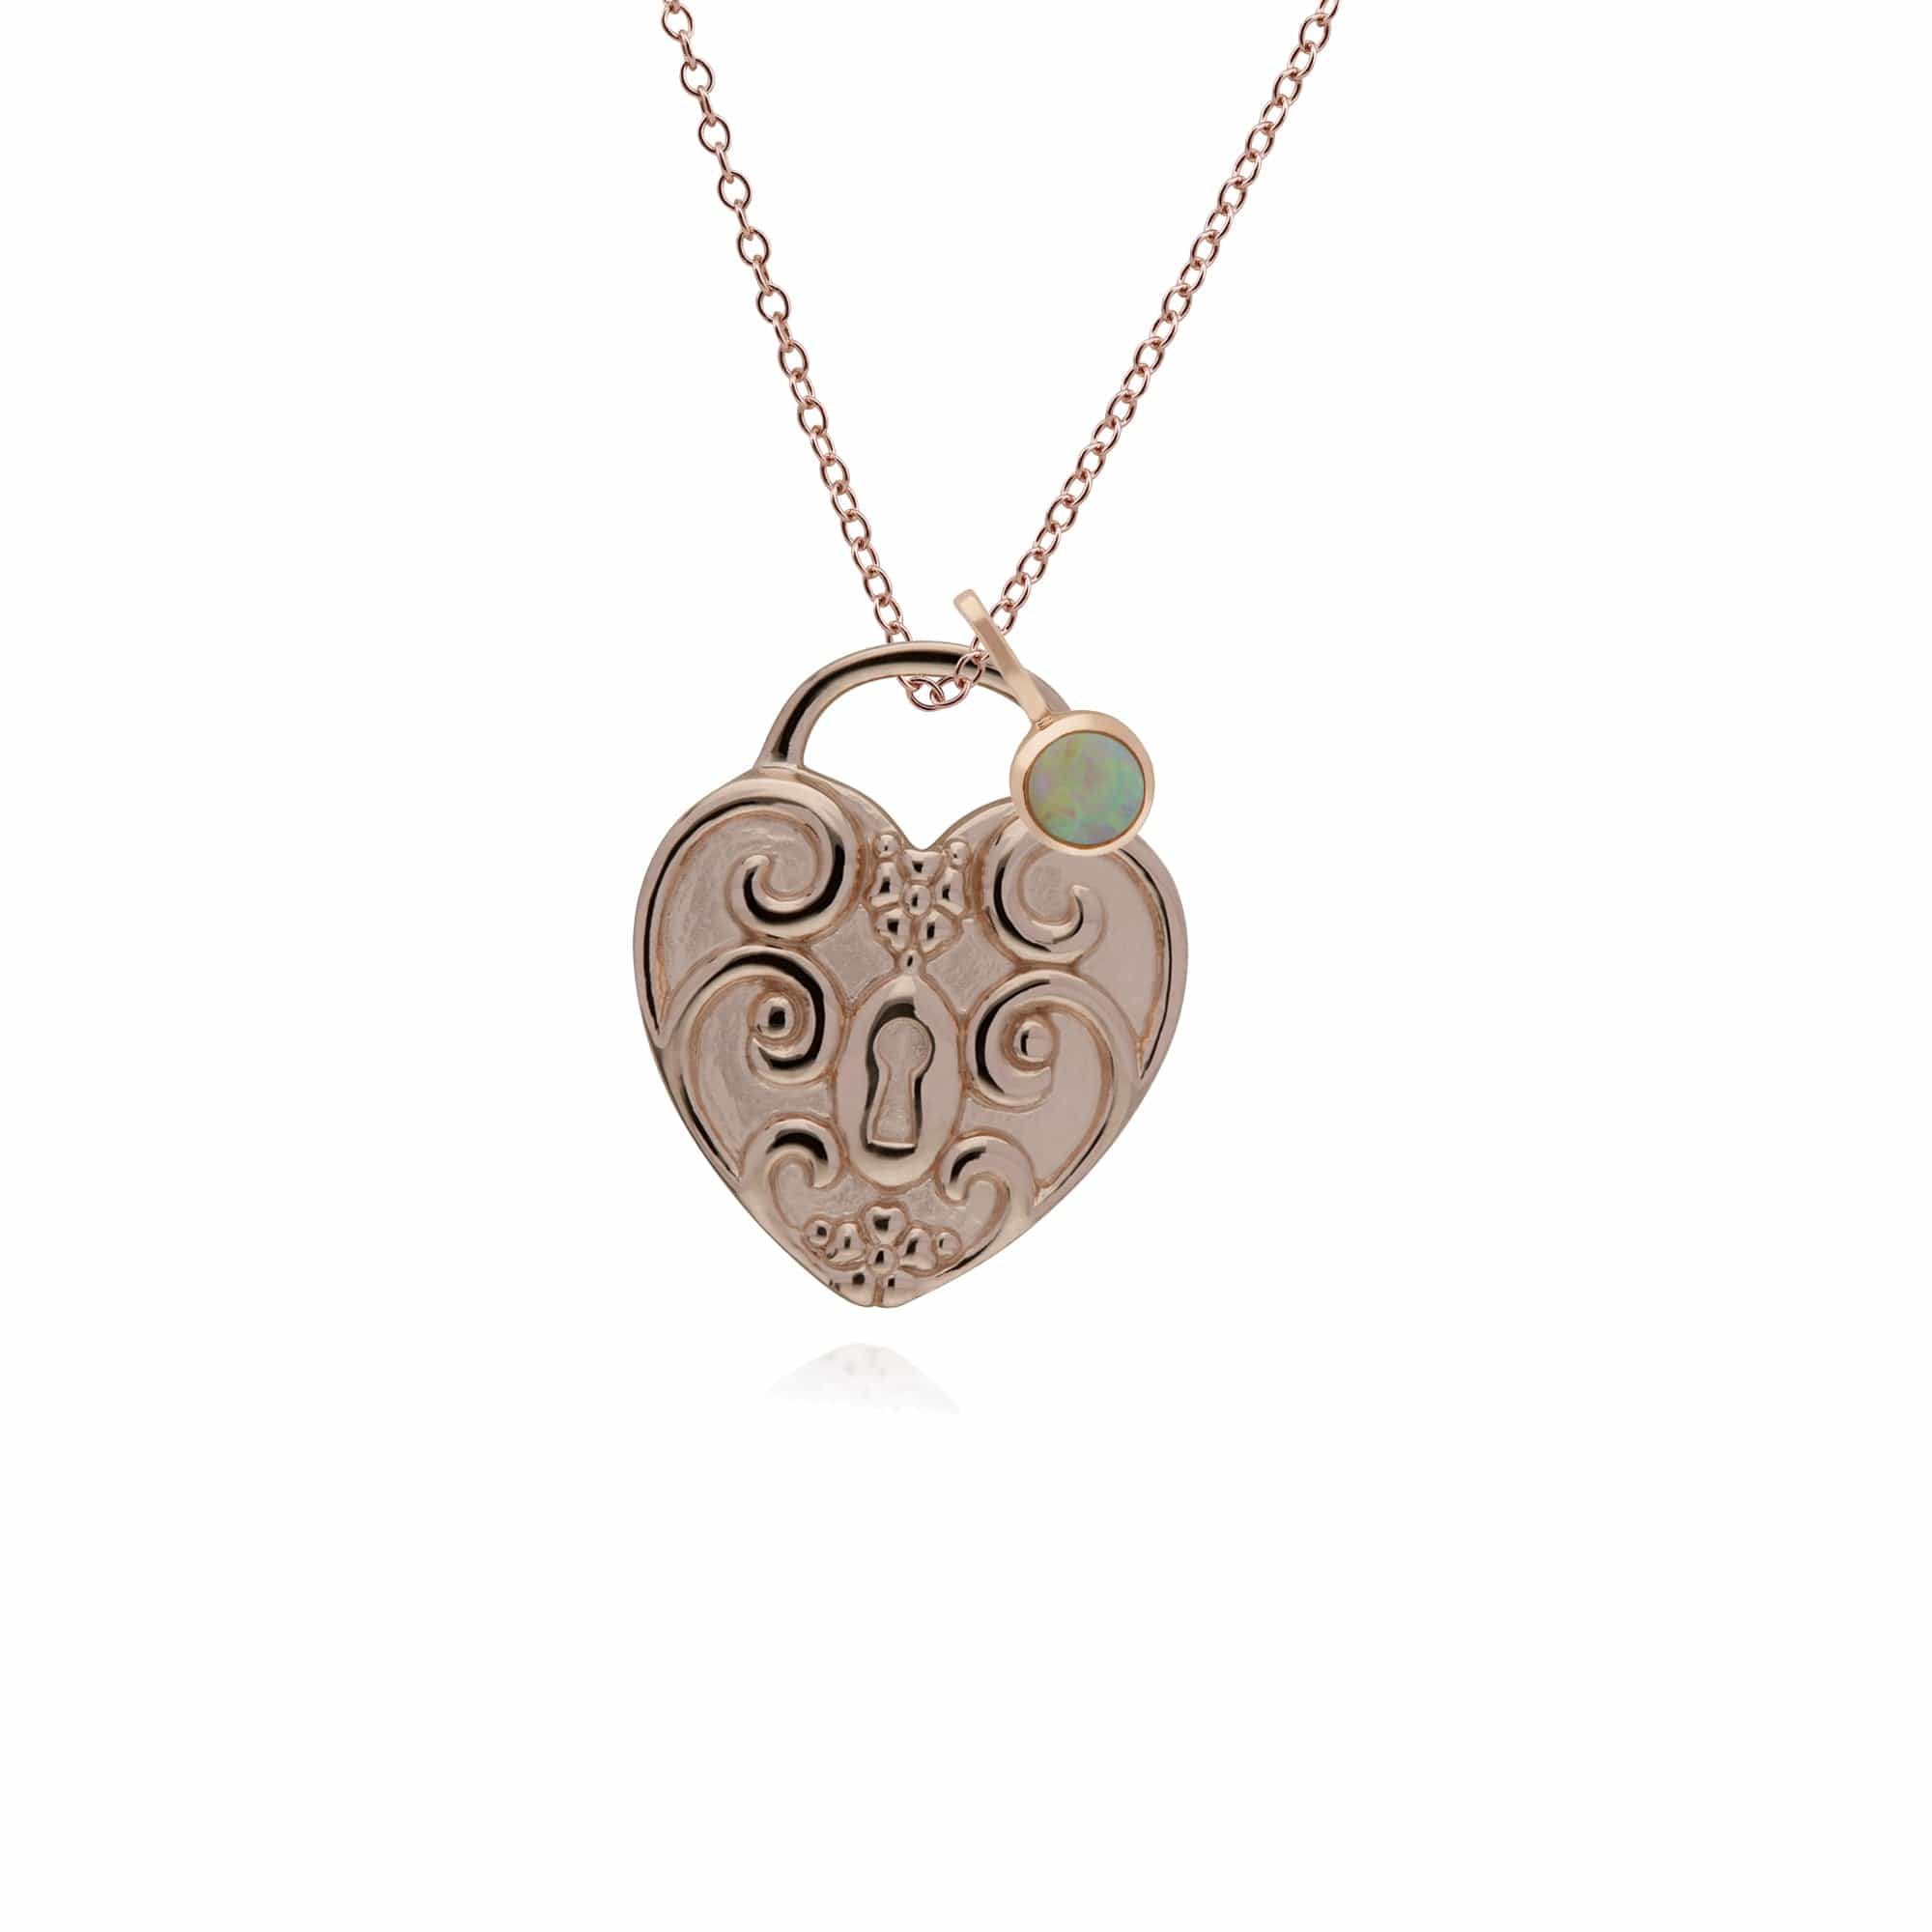 270P025903925-270P026501925 Classic Swirl Heart Lock Pendant & Opal Charm in Rose Gold Plated 925 Sterling Silver 1